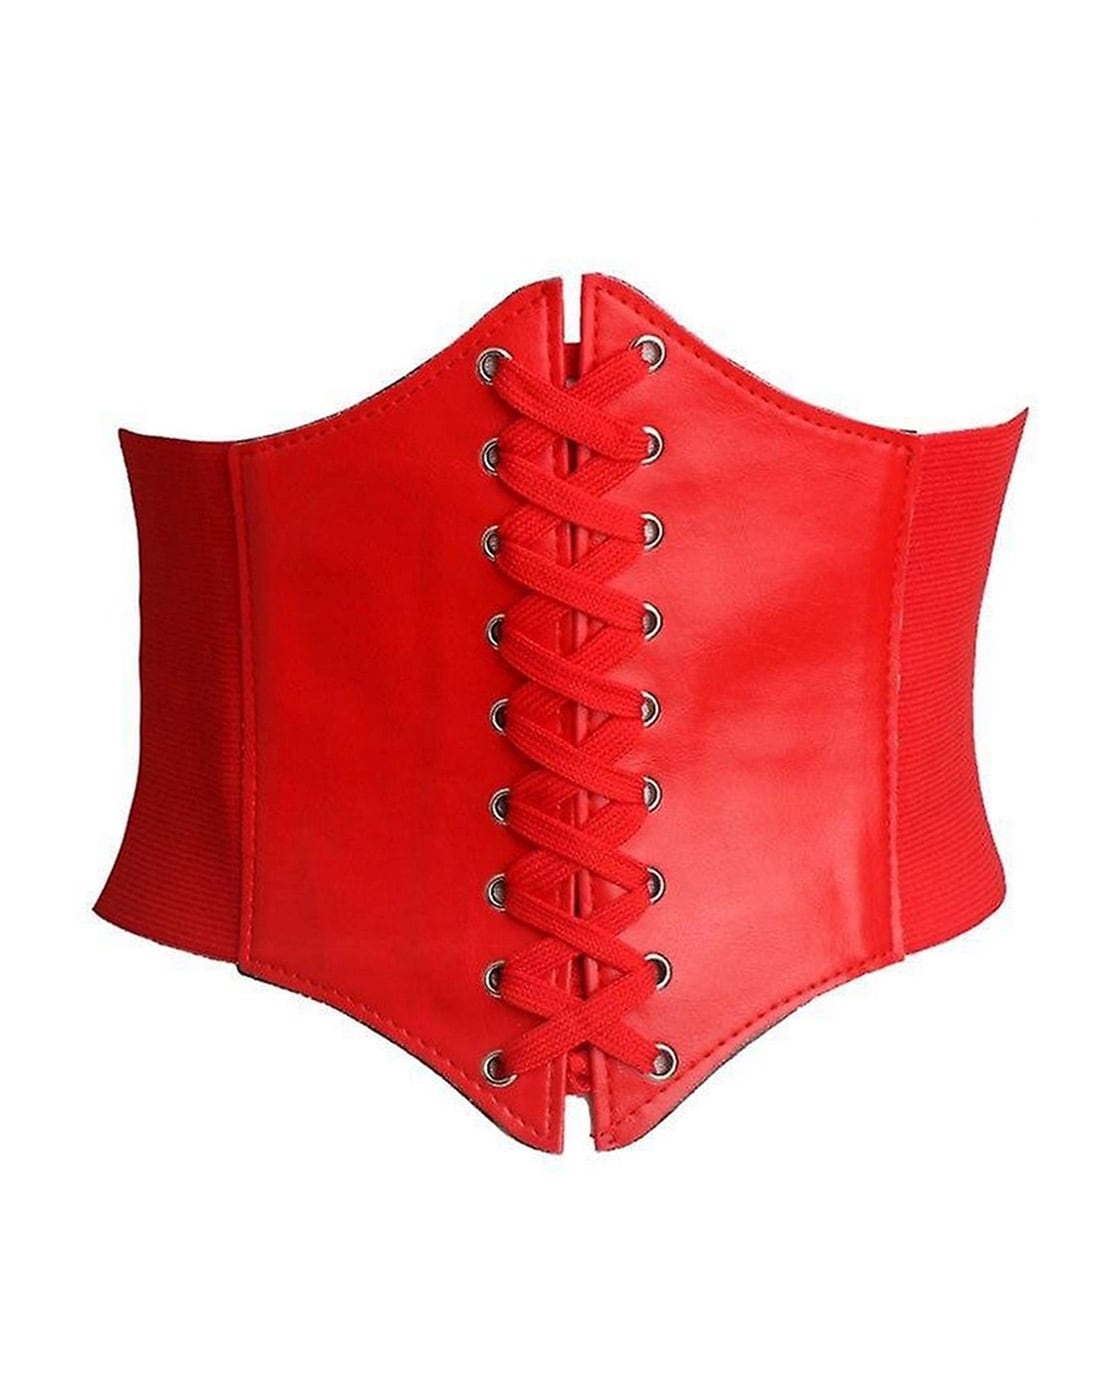 Women’s Beautiful Red Form-Fitting Lace-Up Corset Belt